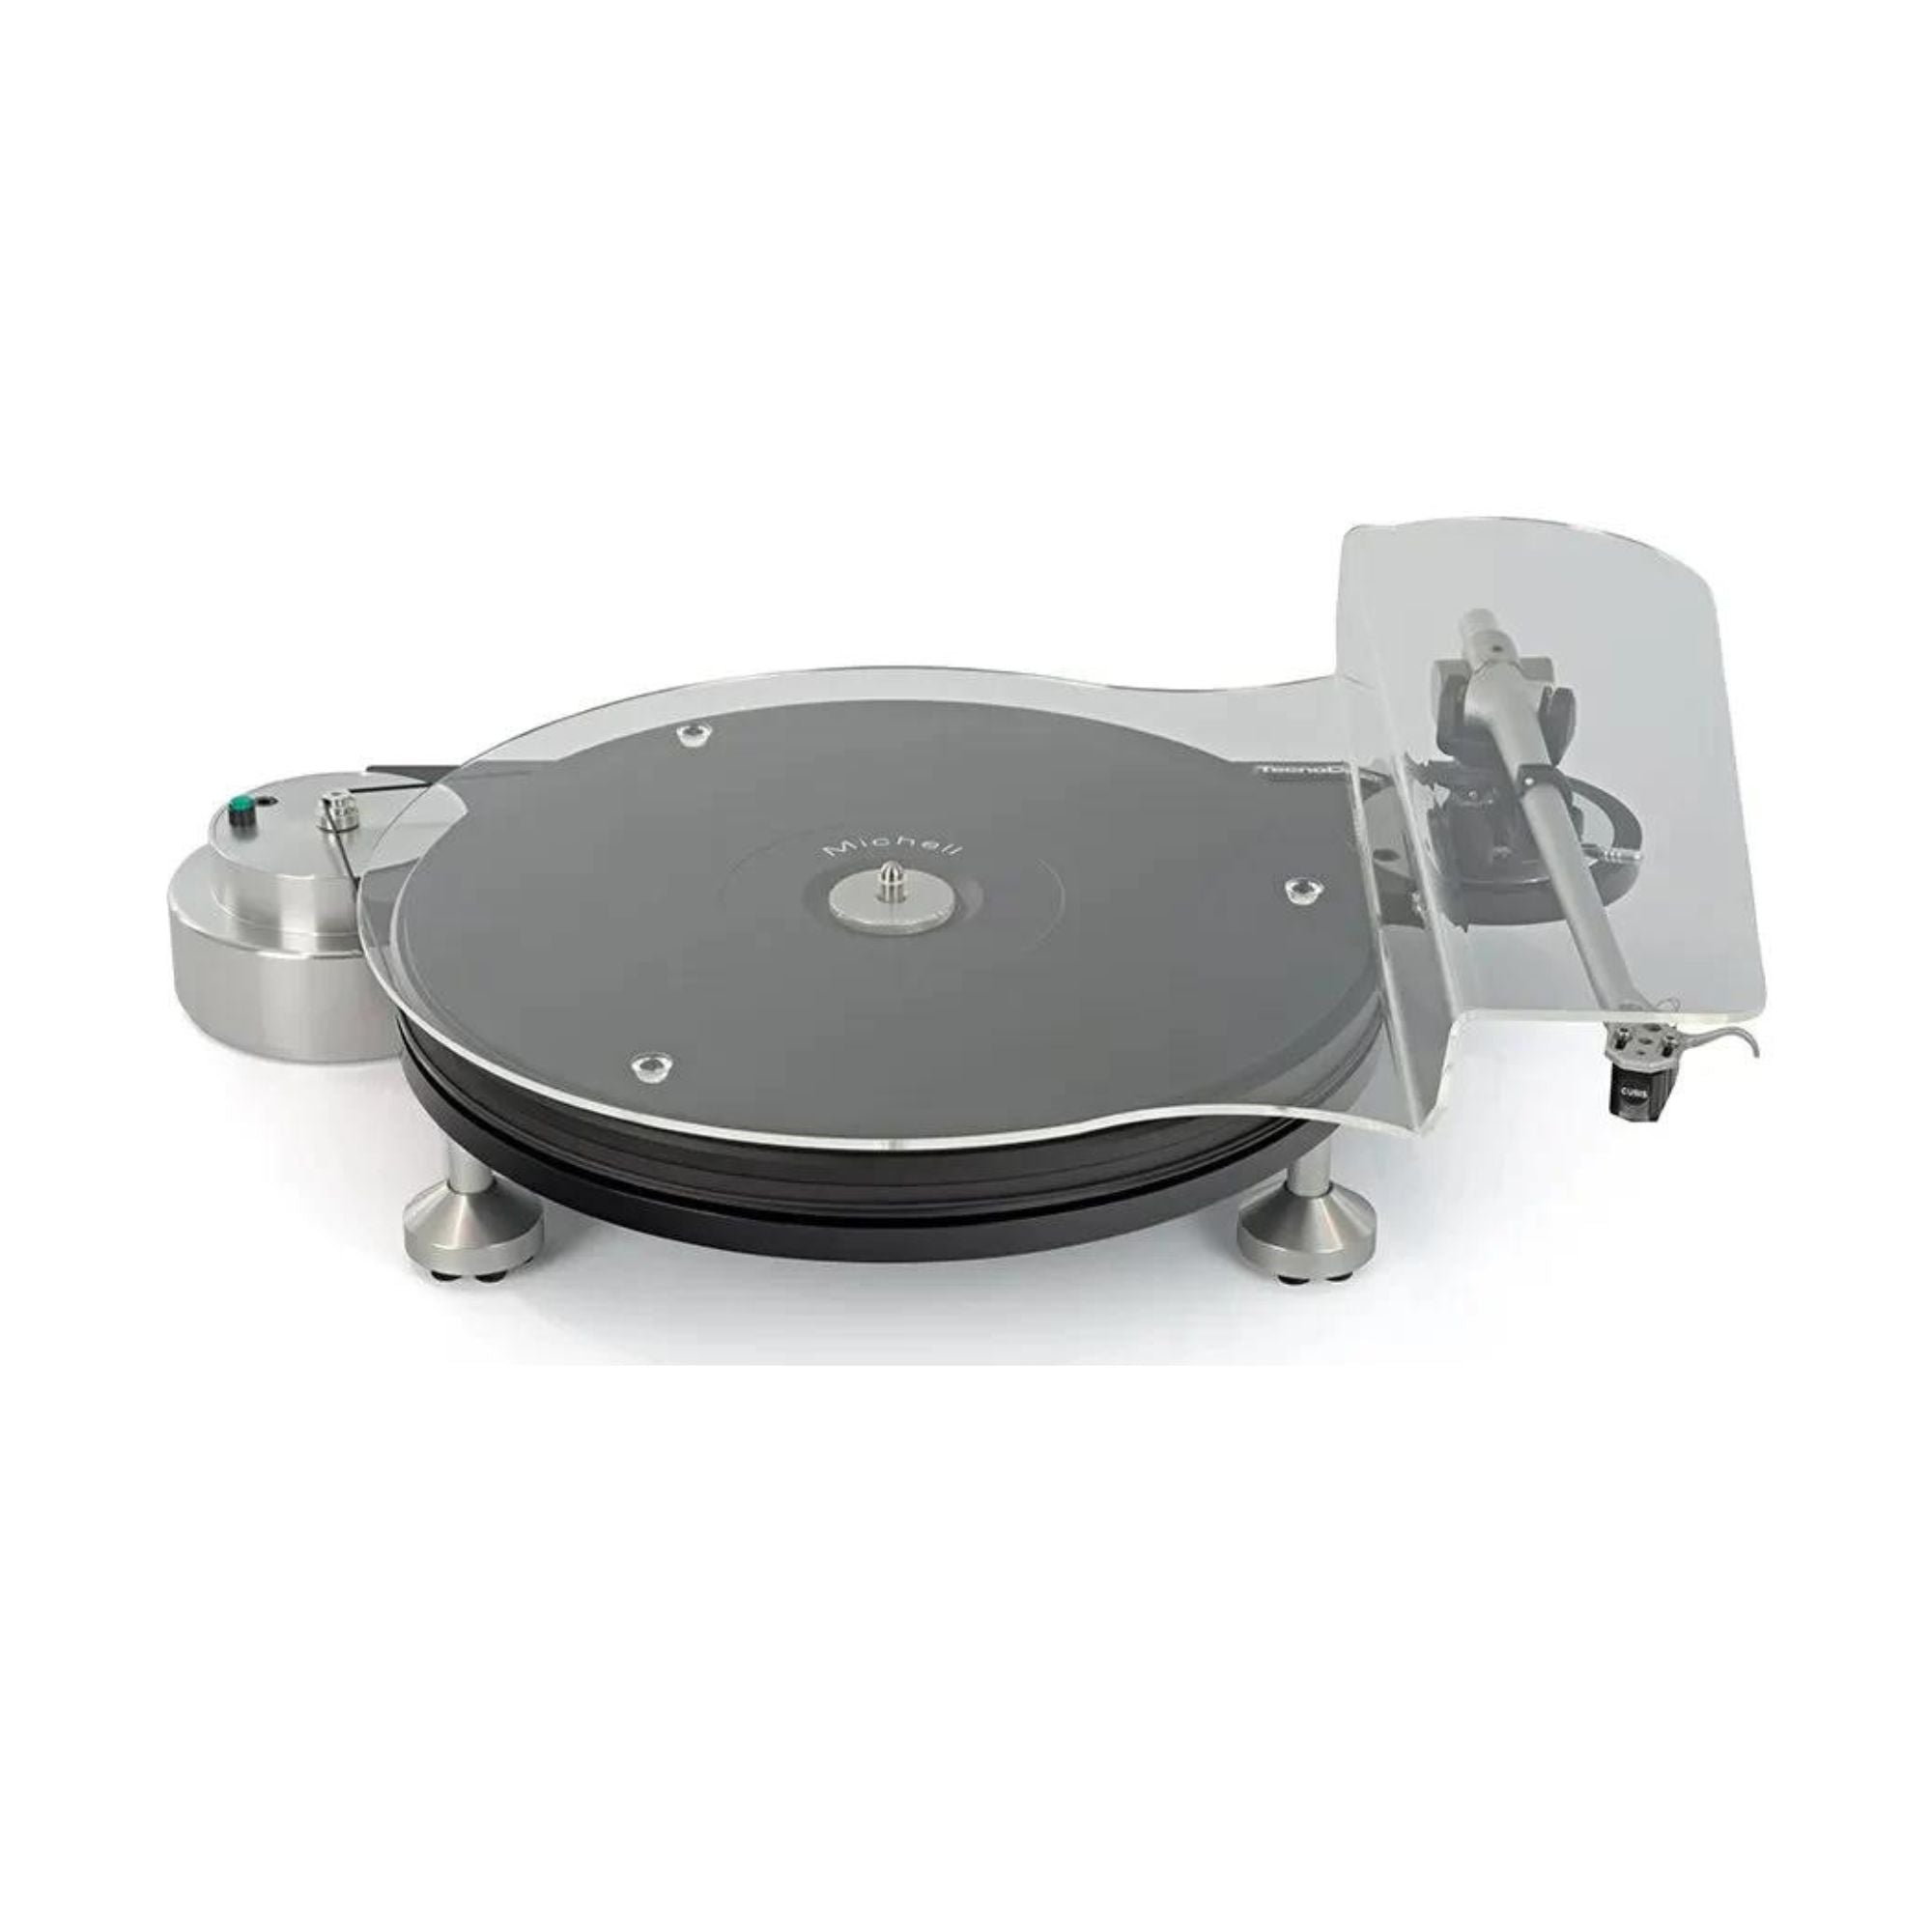 Michell TecnoDec Turntable With T2 Tonearm(T011), Michell, Turntable - AVStore.in